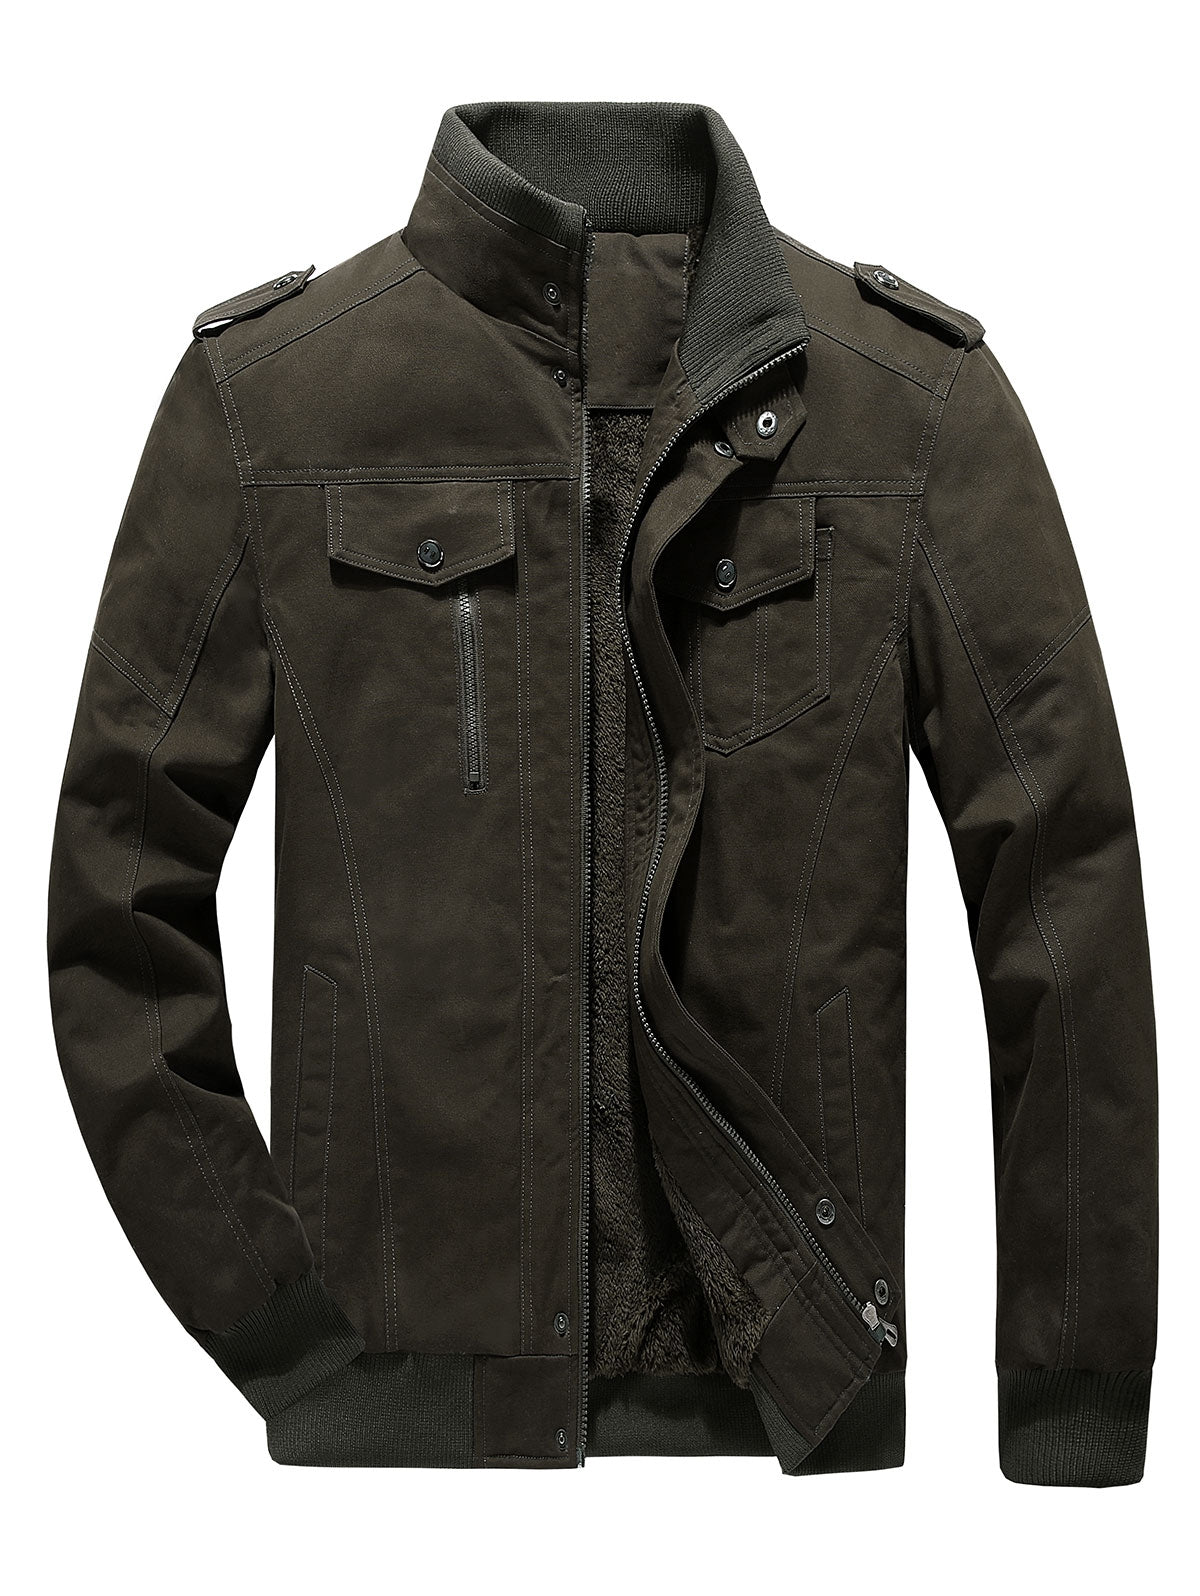 Men's Lined Warm Fluffly Stand Collar Pockets Jacket